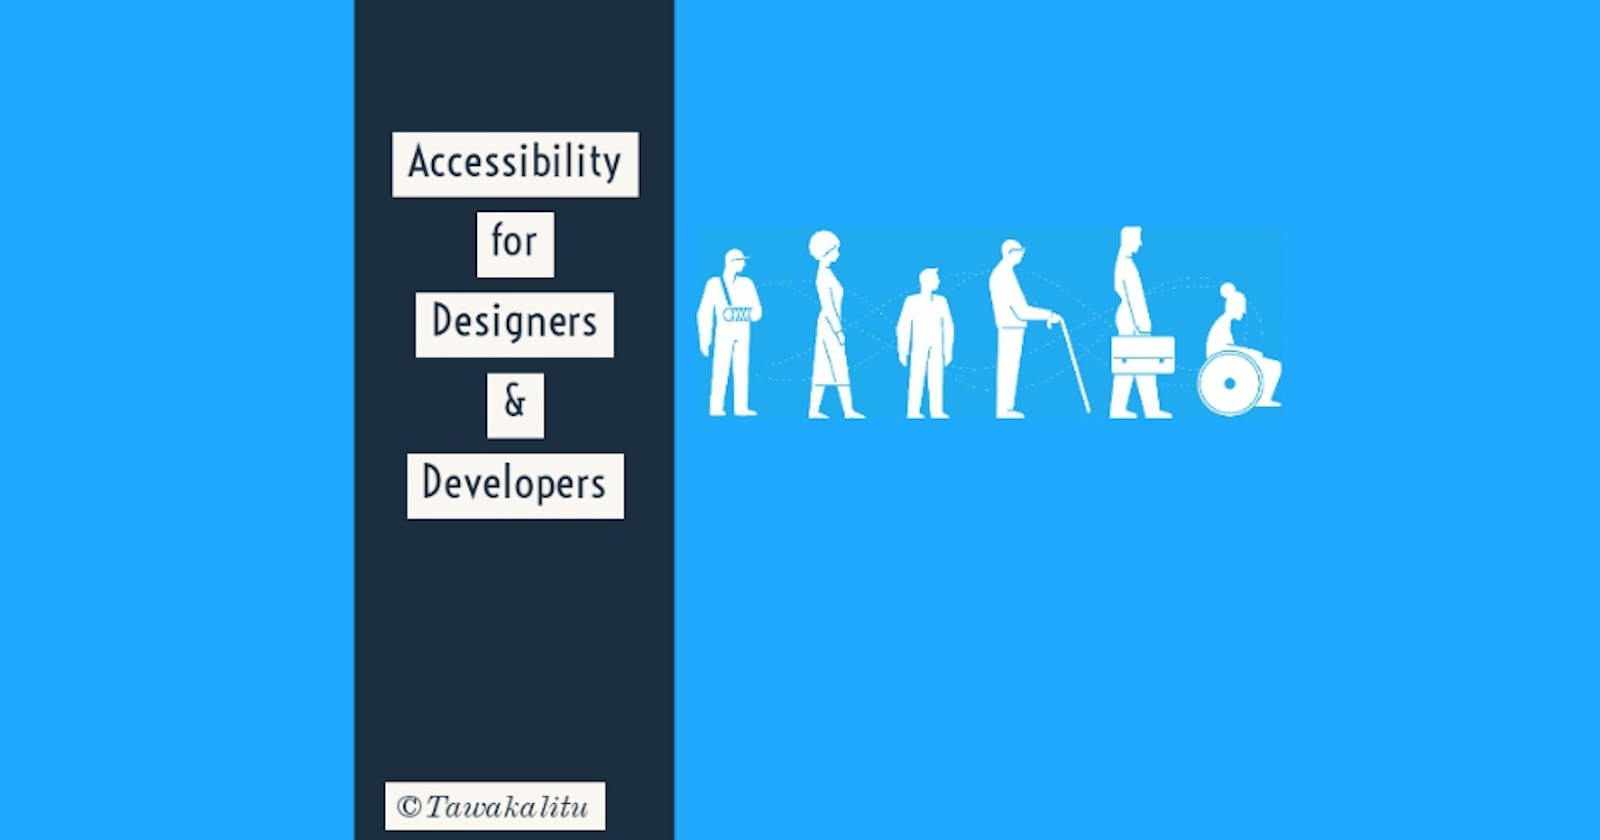 Accessibility for Designers and Developers